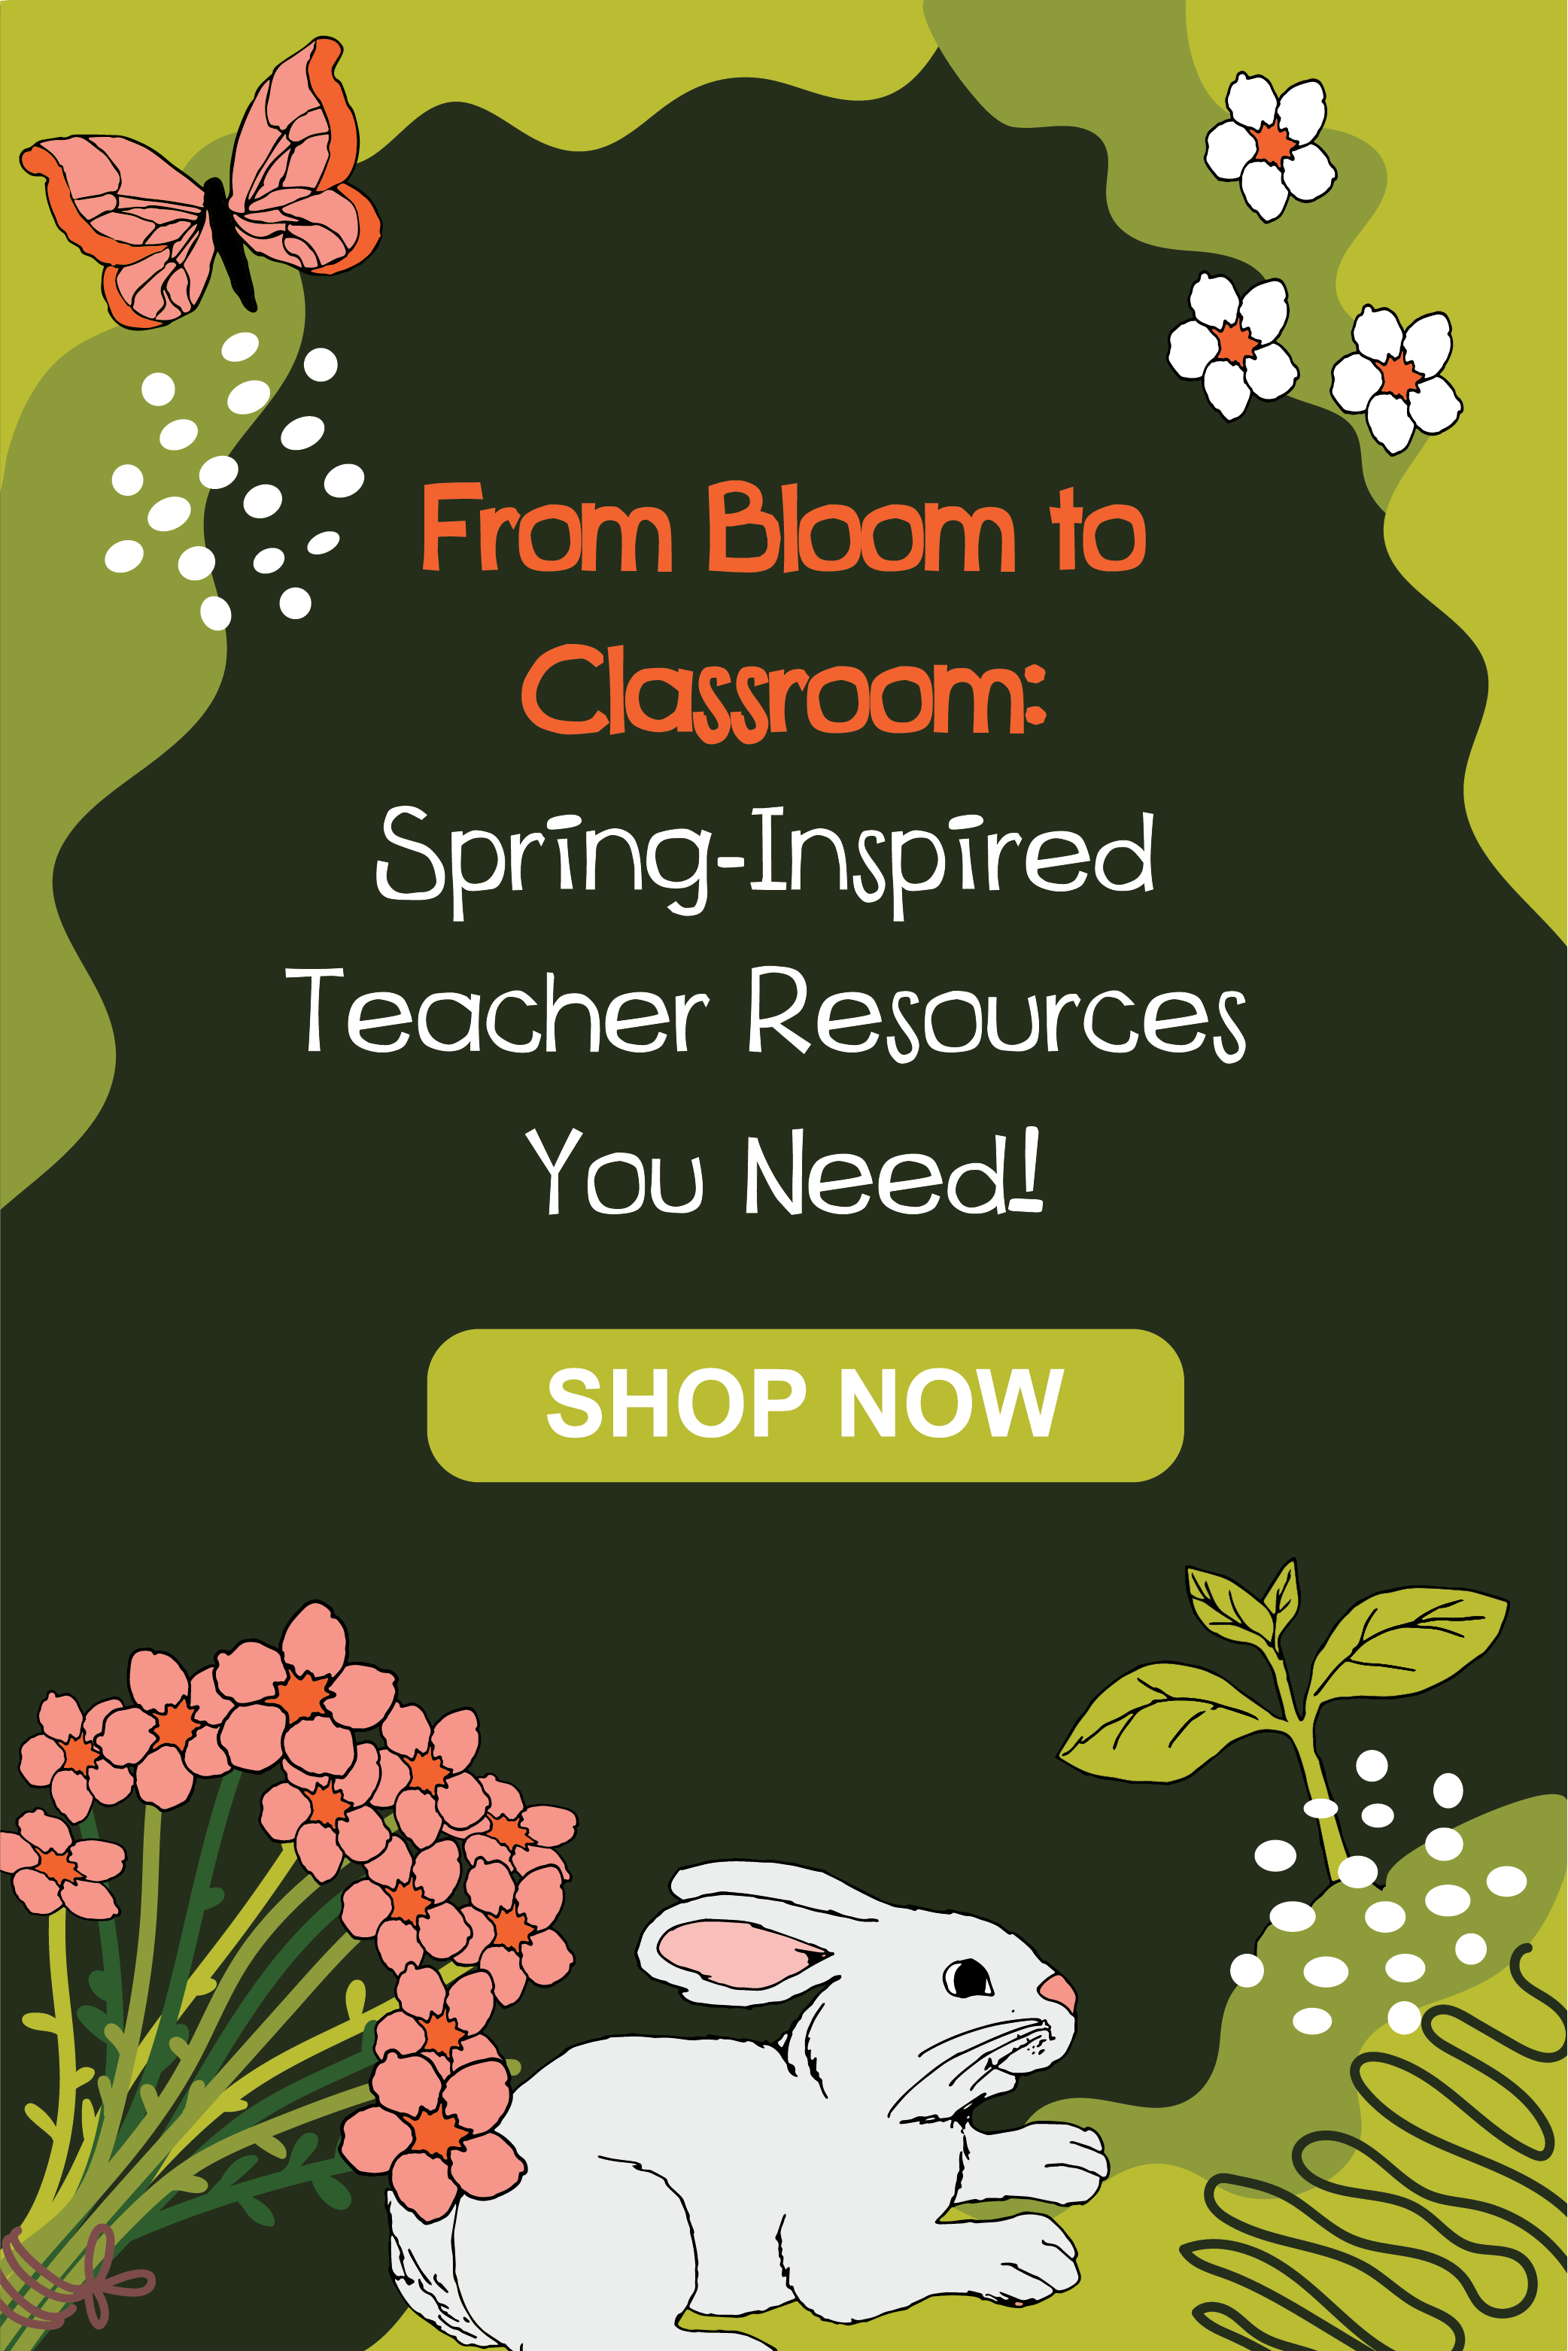 Doodles Ave from bloom to classroom: spring-inspired teacher resources you need!